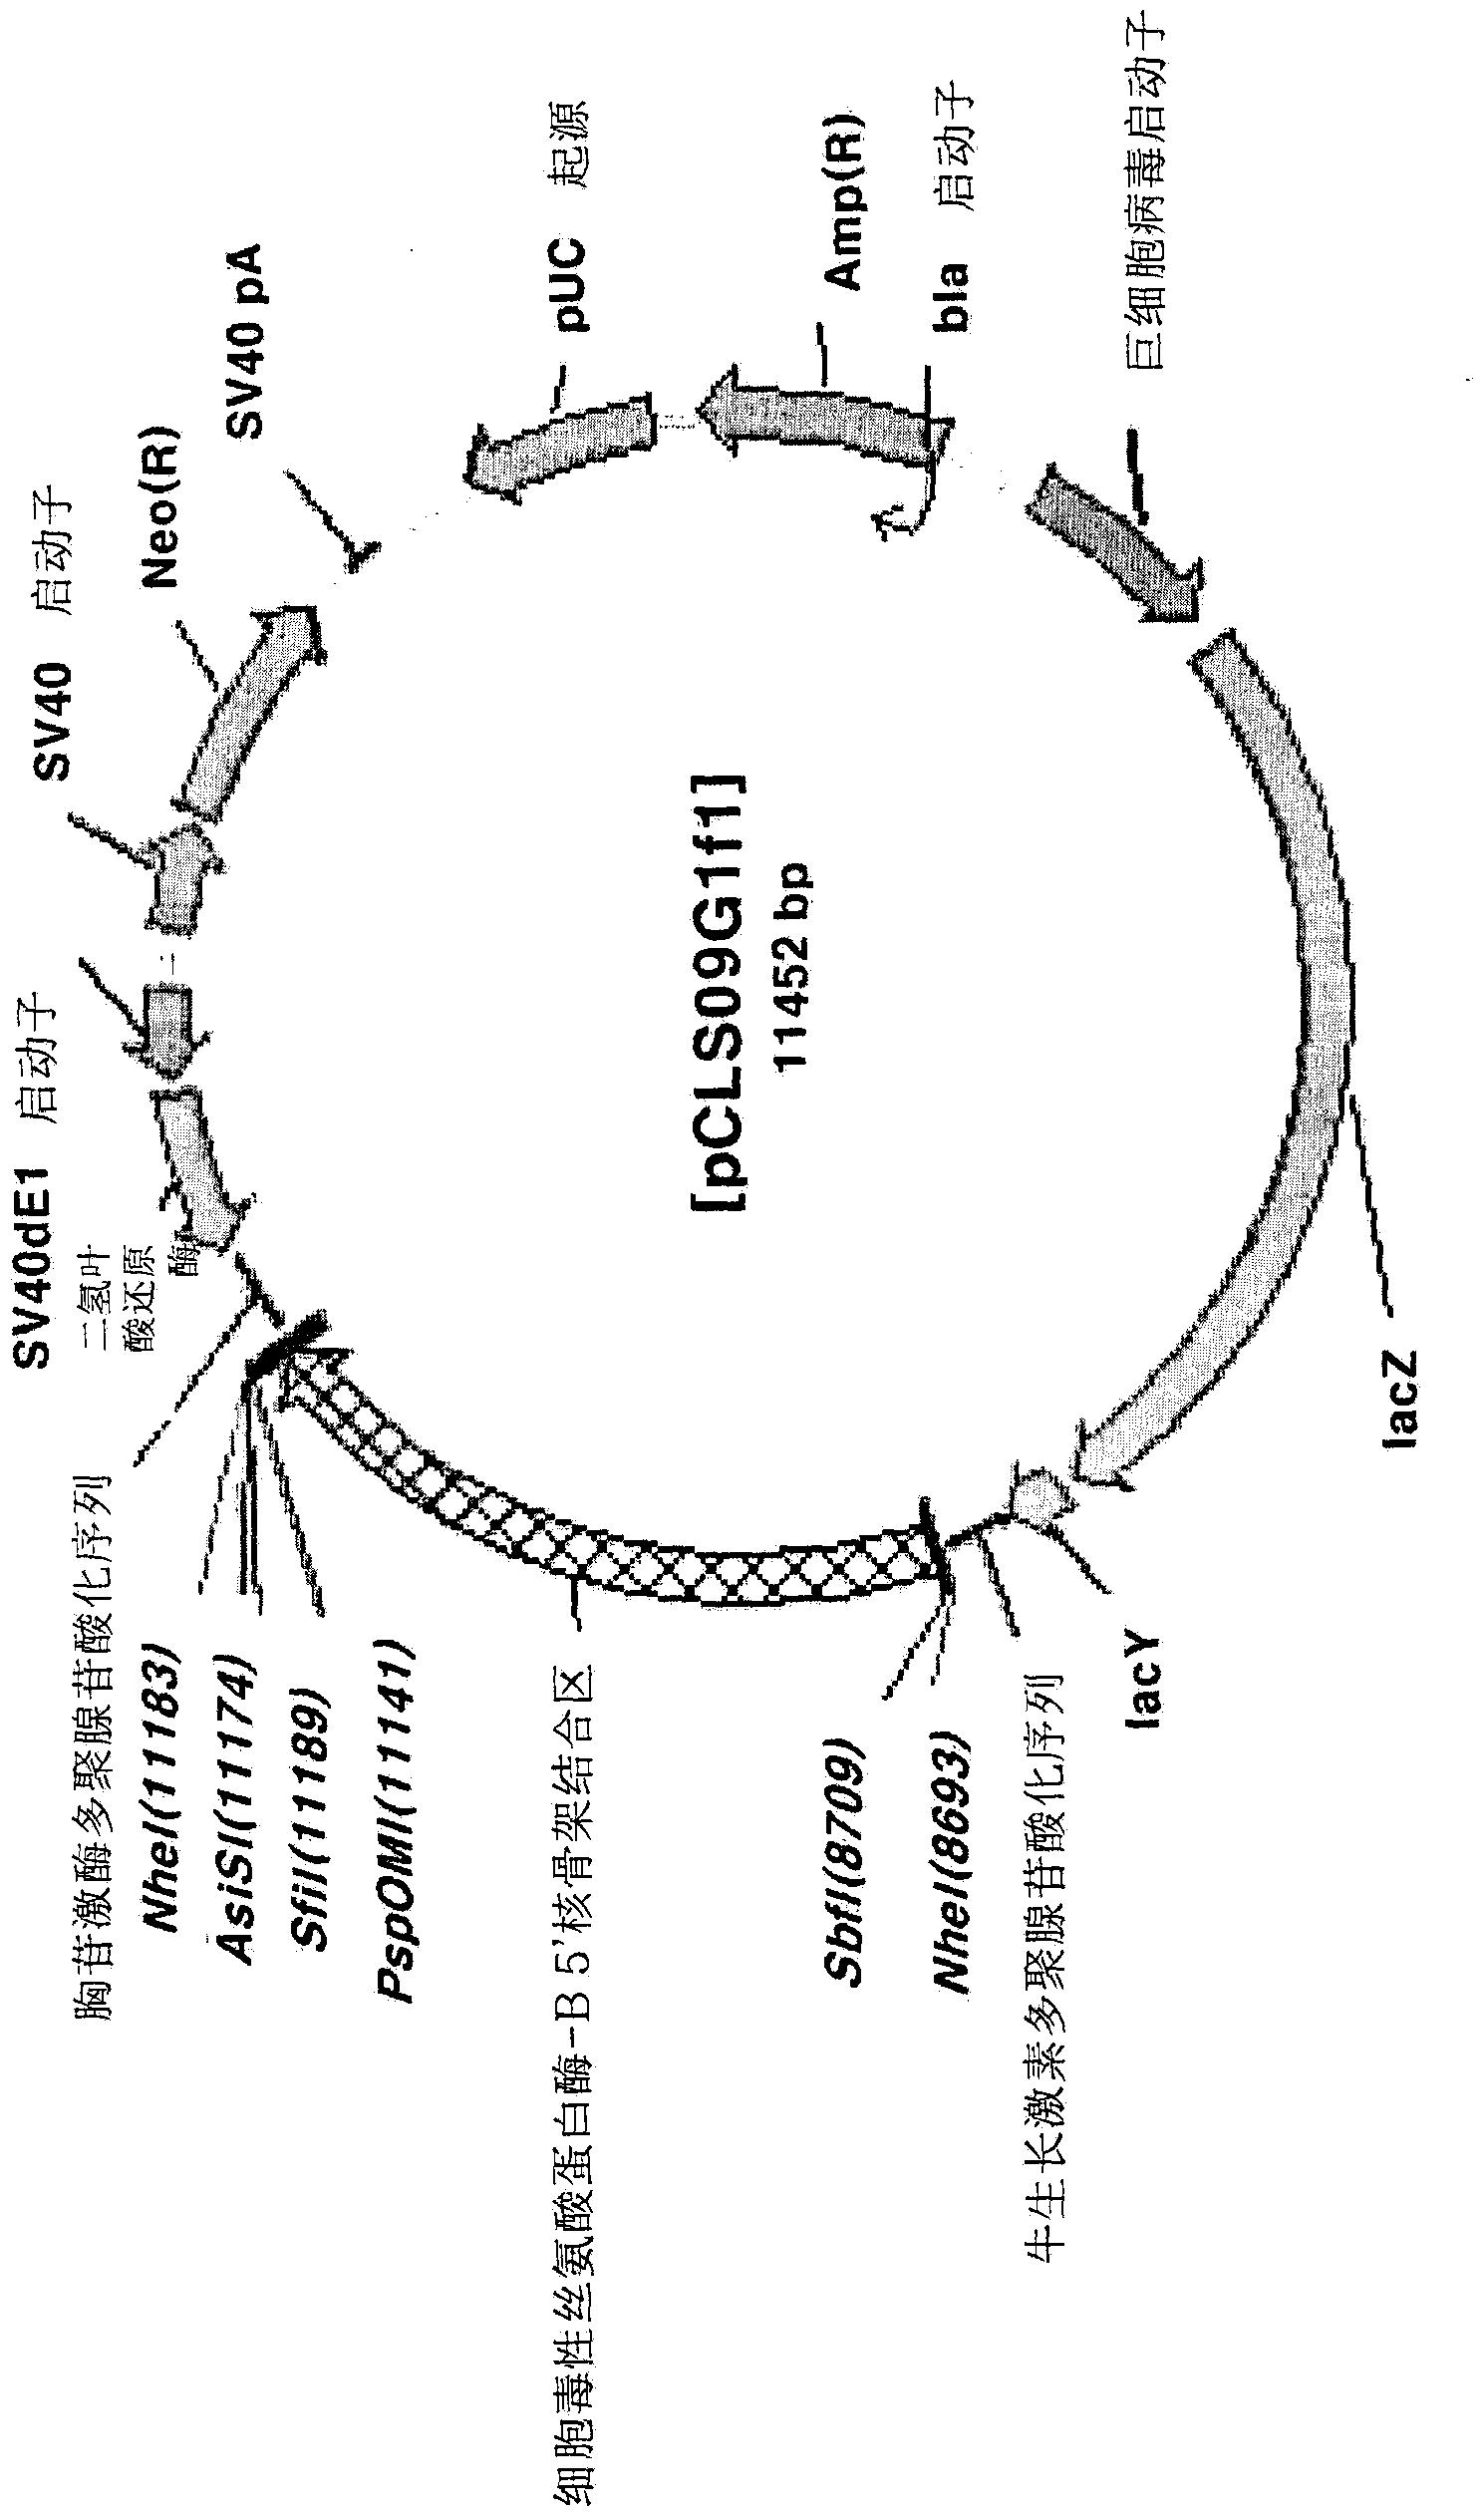 Expression vector for animal cells including csp-b 5'-sar factor and method for producing recombinant proteins using same